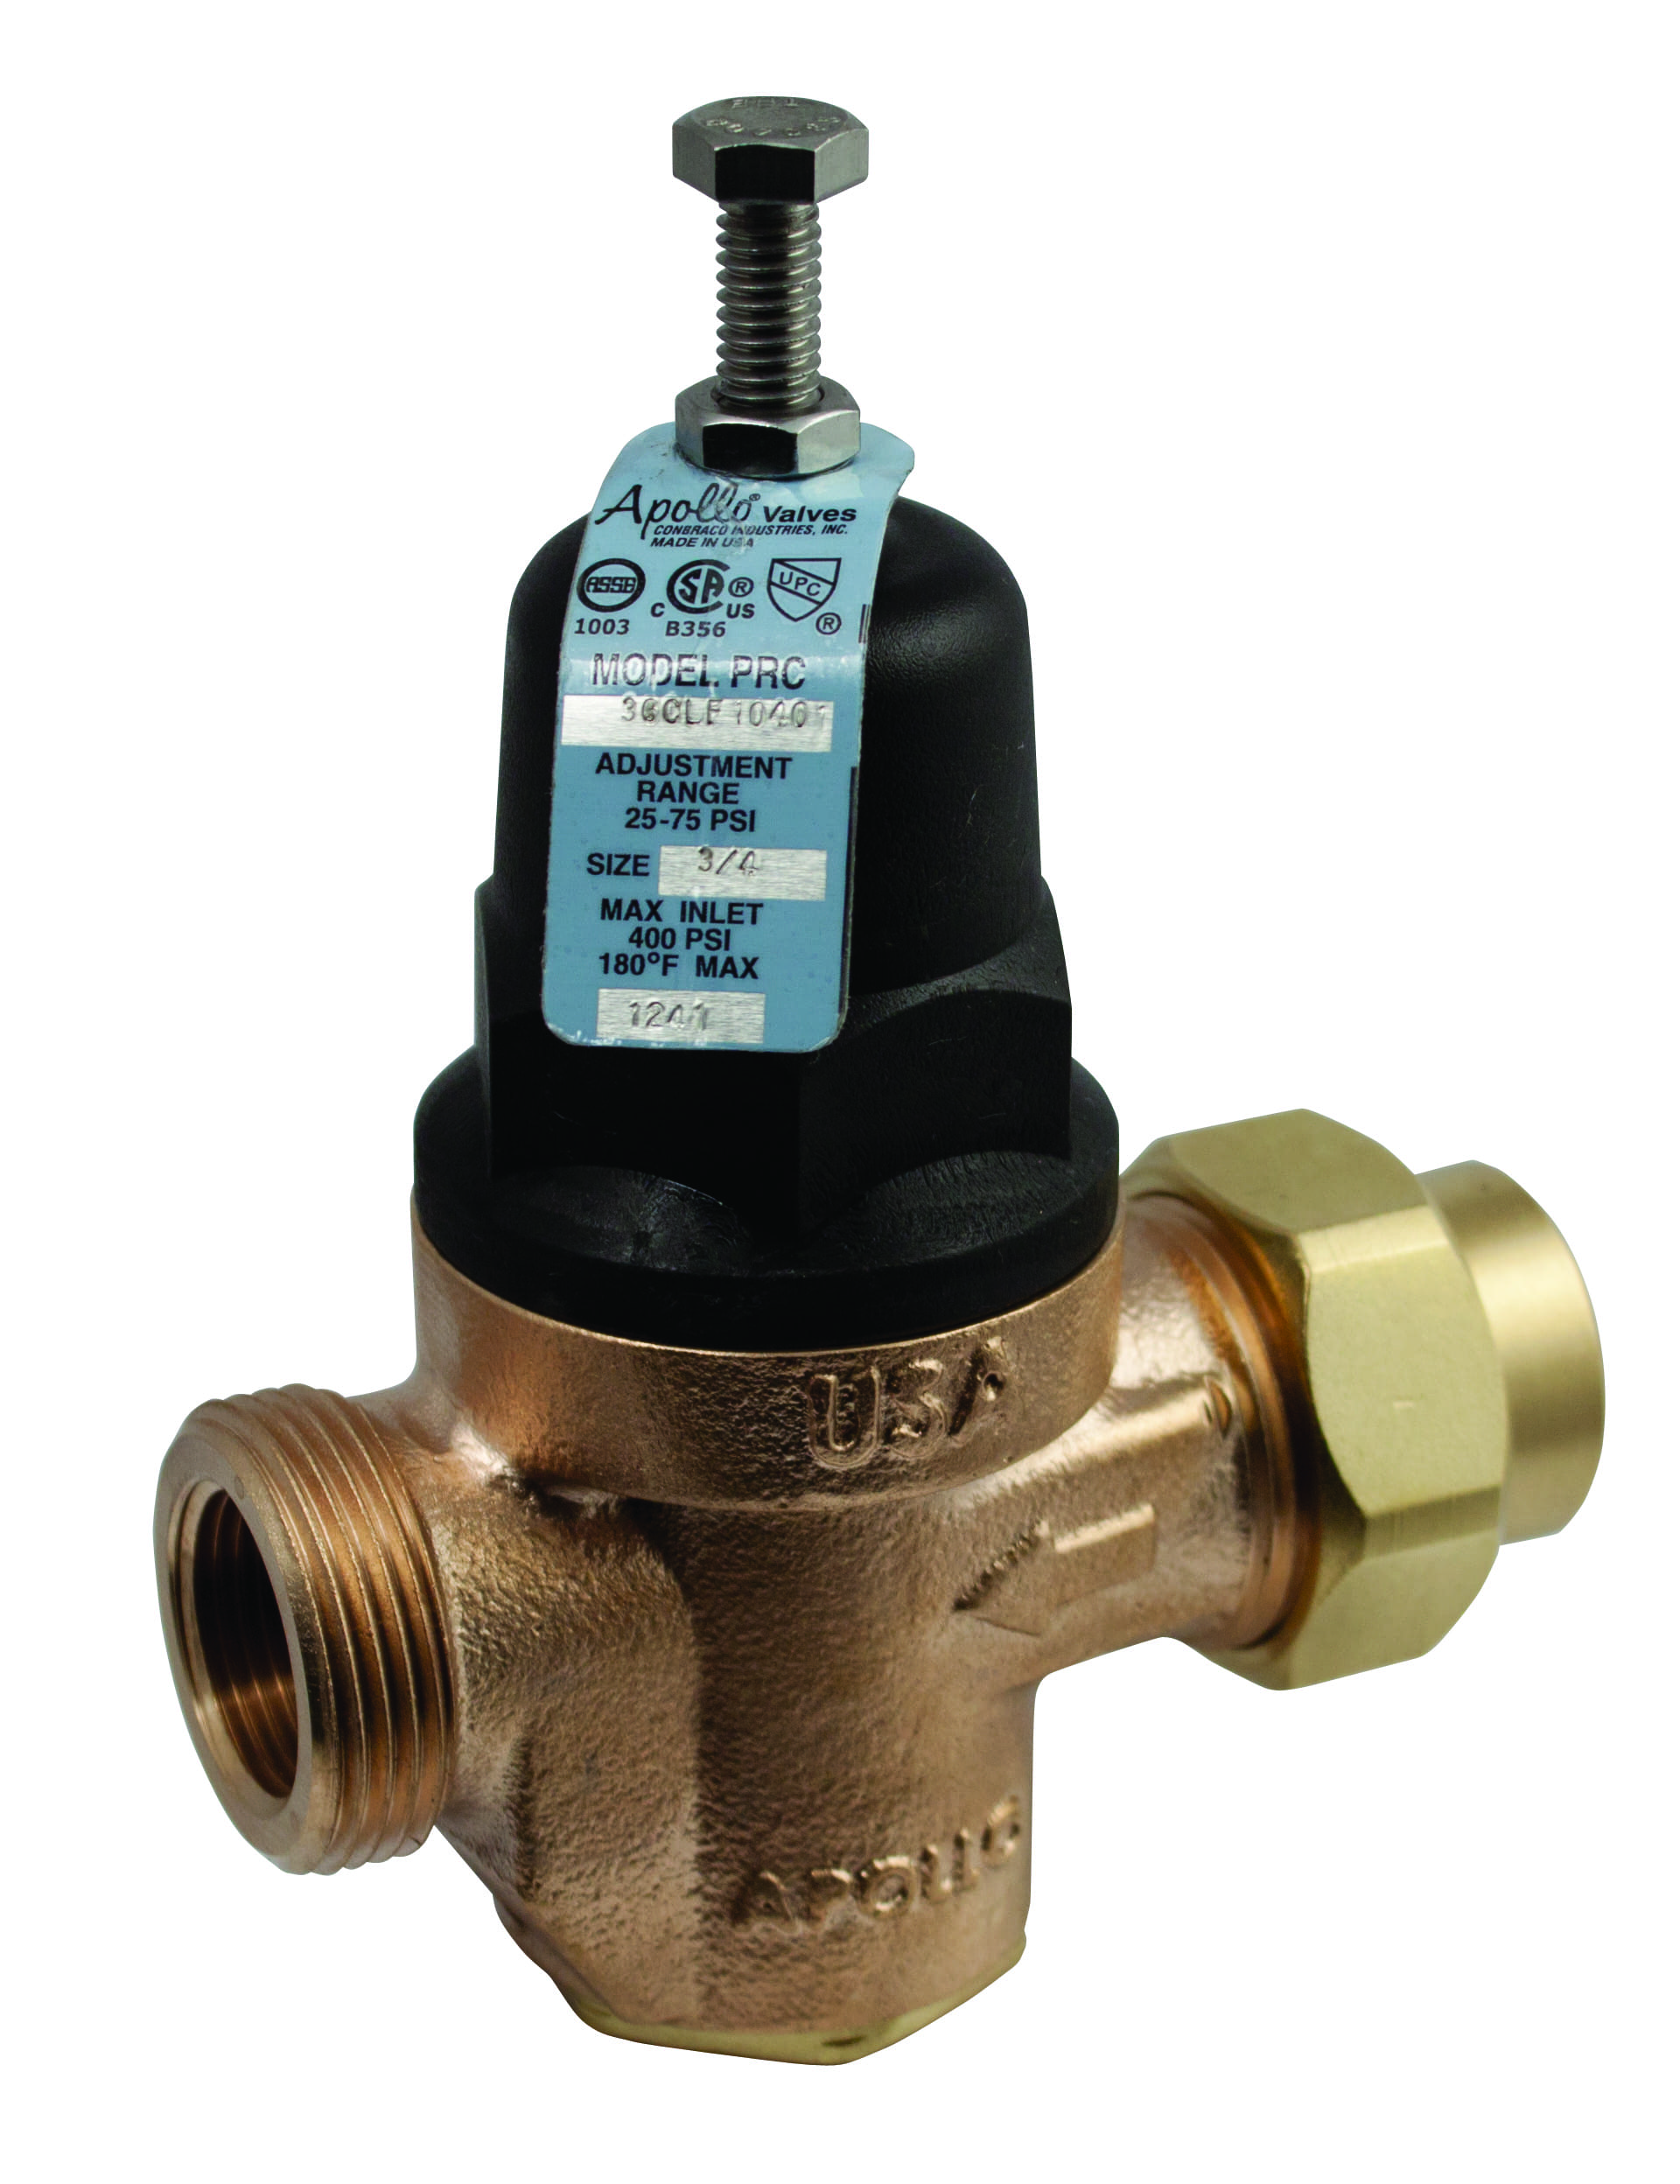 Preview image for Apollo Compact Lead Free Water Pressure Reducing Valves with Gauge (Union FNPT x FNPT)